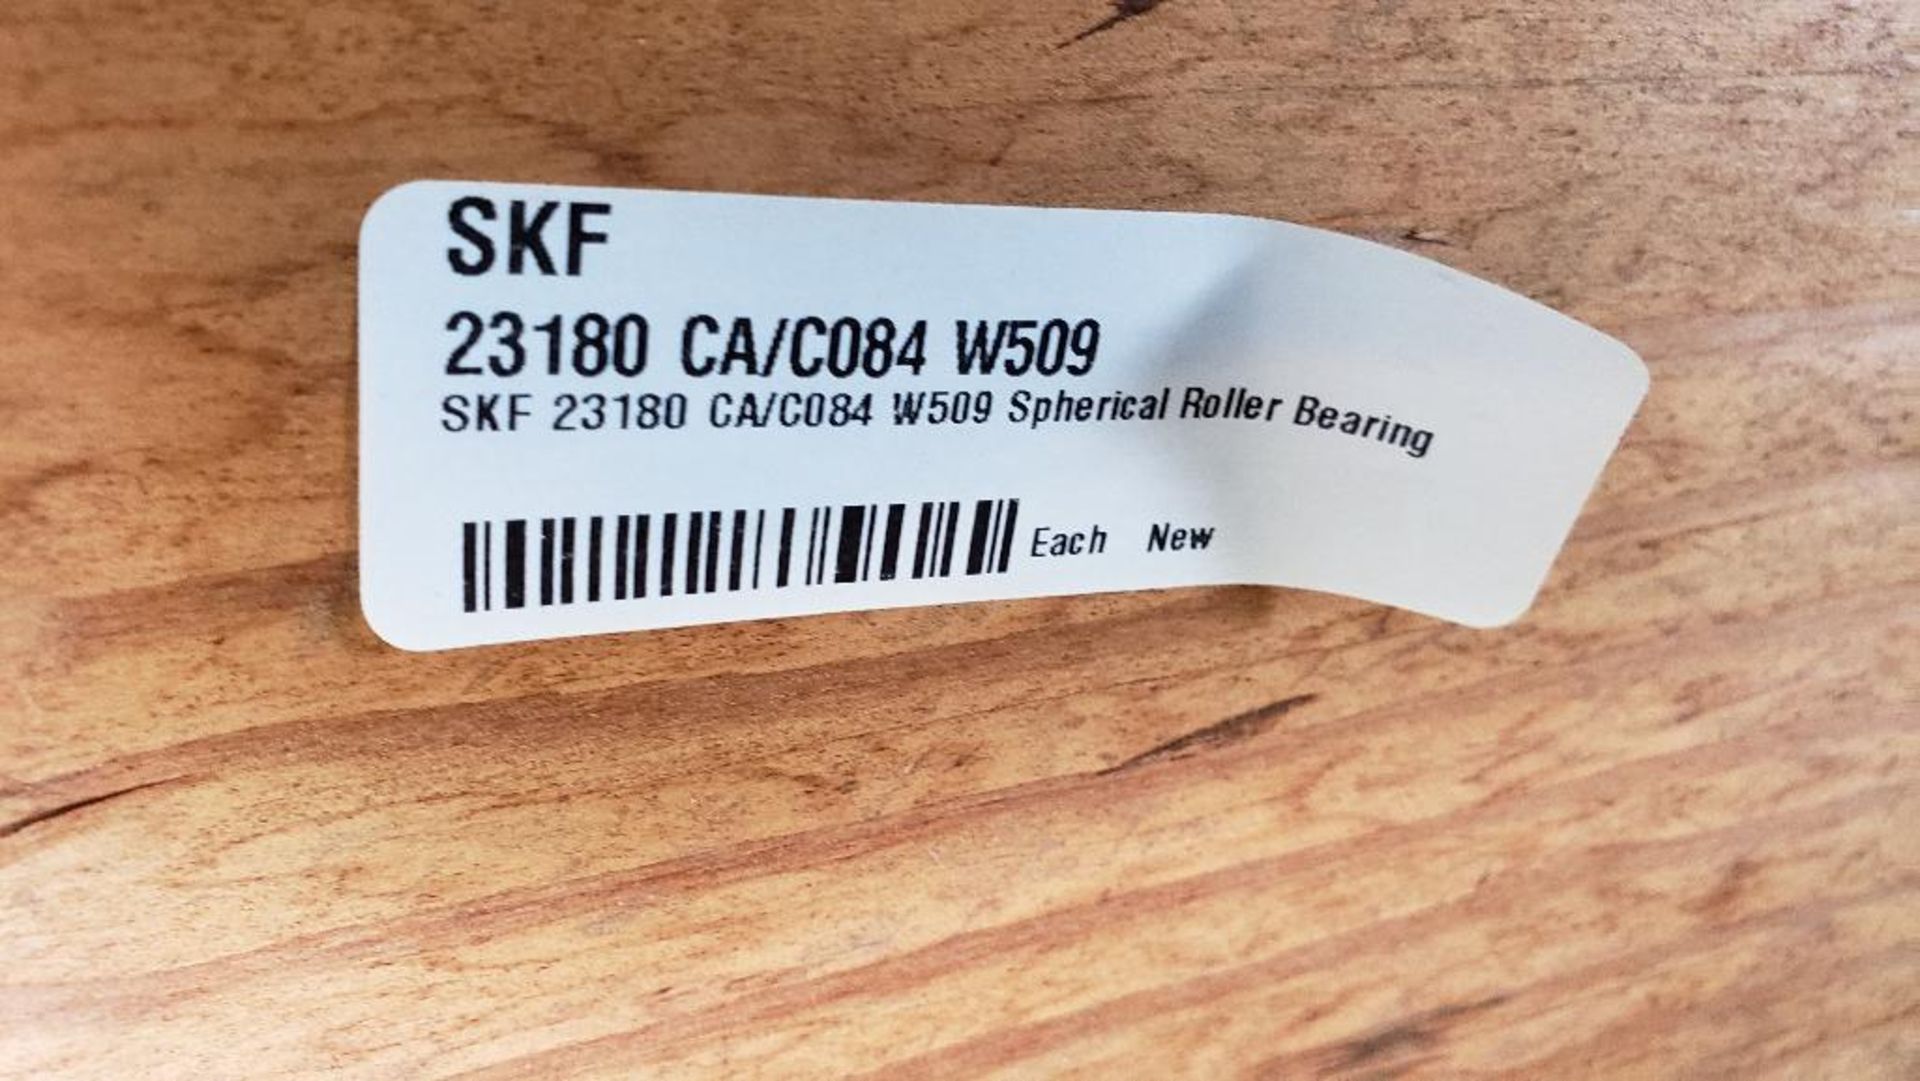 SKF super precision large capacity bearing. Part number 23180 CA/C084-W509. New in crate. - Image 4 of 6